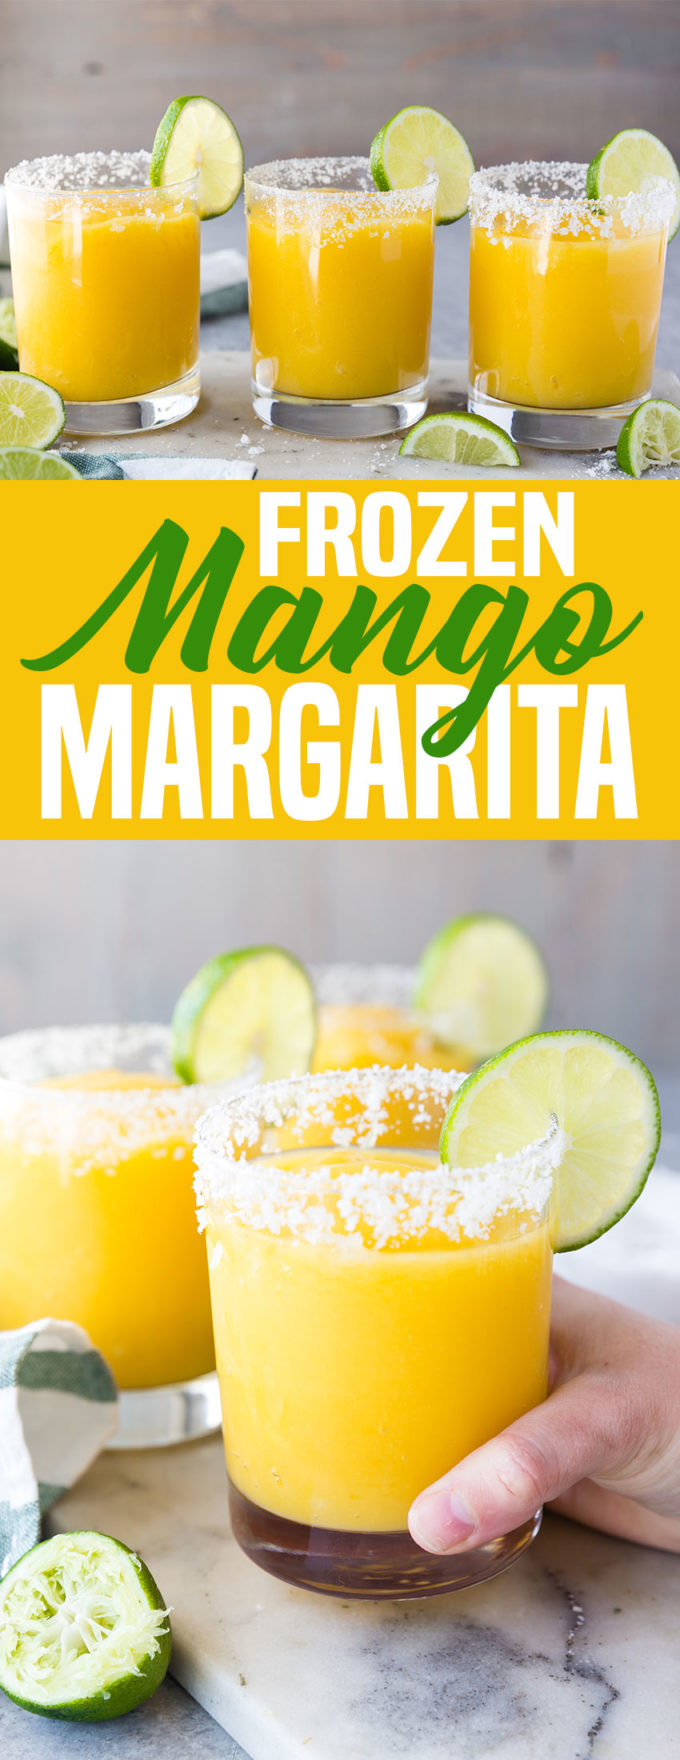 These Mango Margaritas are so good! Frozen margaritas (virgin) that taste so good. Toss in your favorite liquor to make them for adults. 